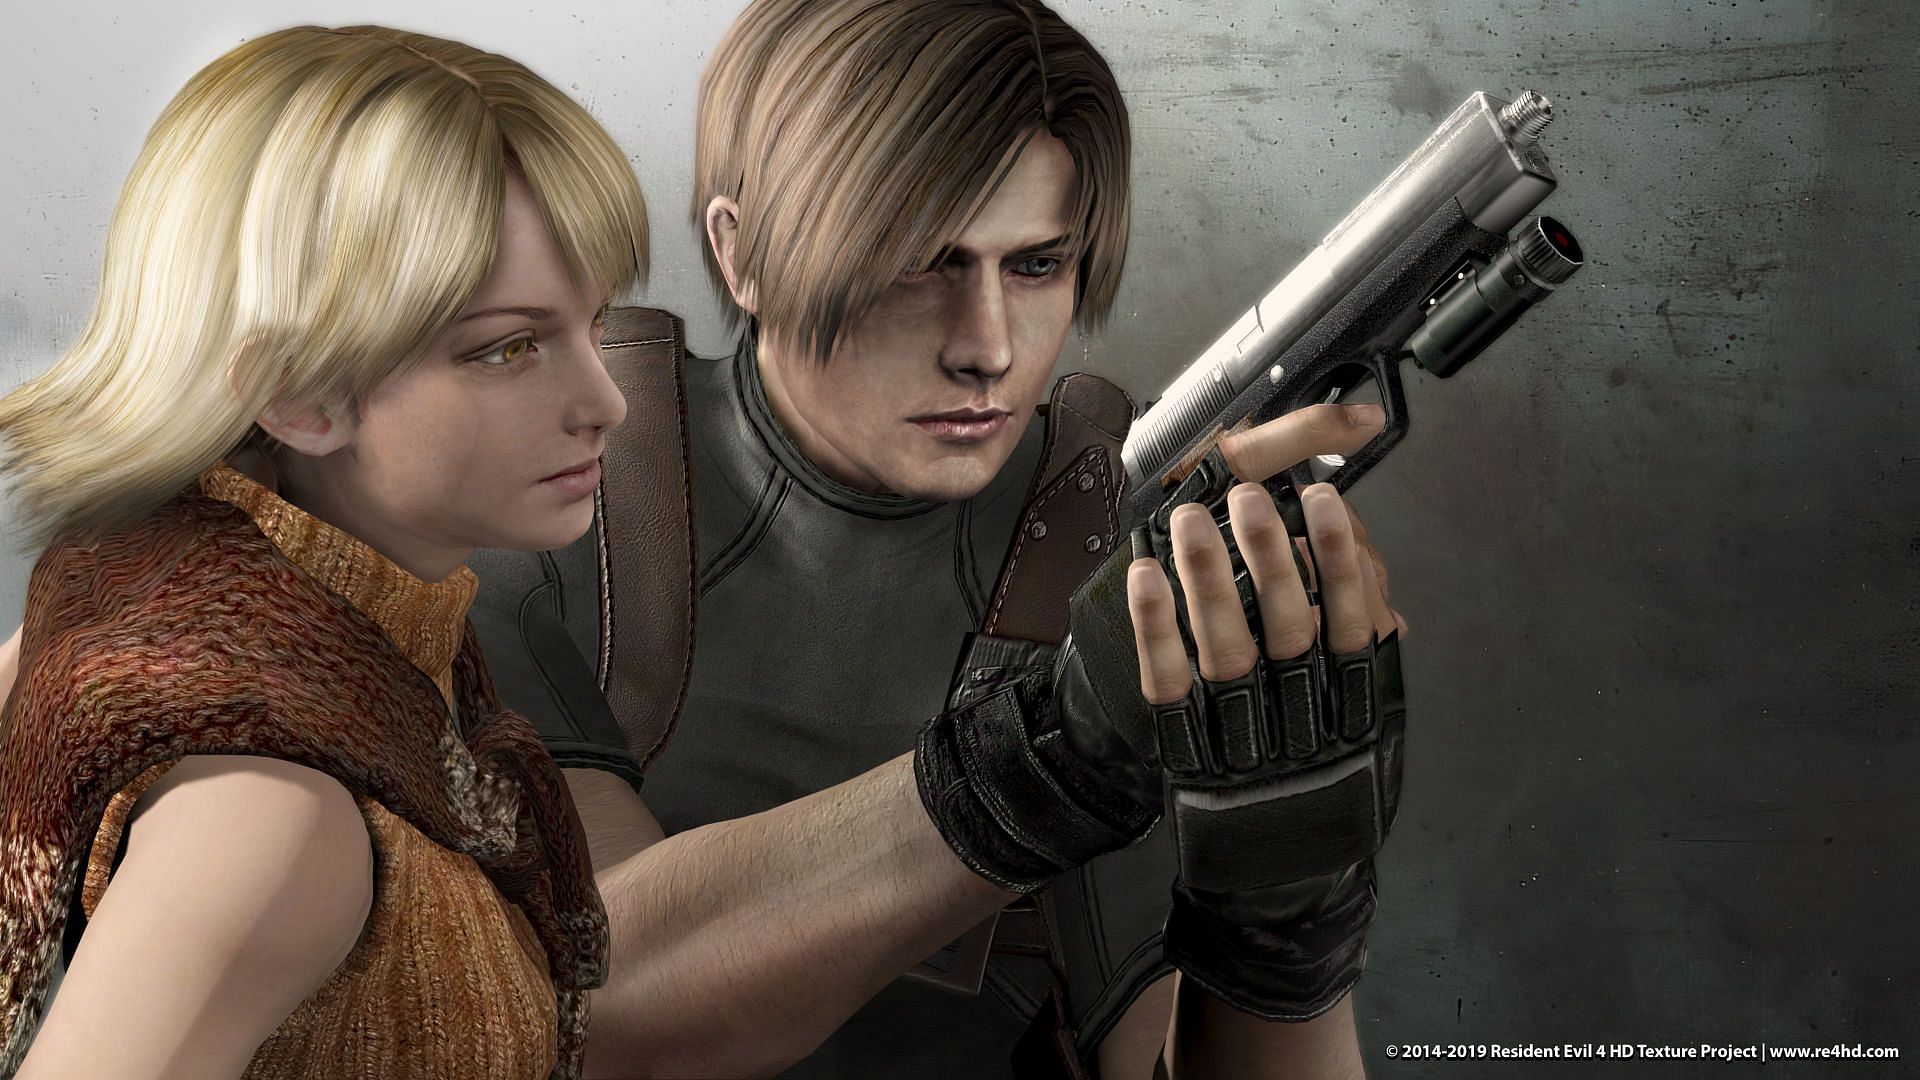 Resident Evil 4 REMAKE (Full Game) is FANTASTIC with NEW VR Mod